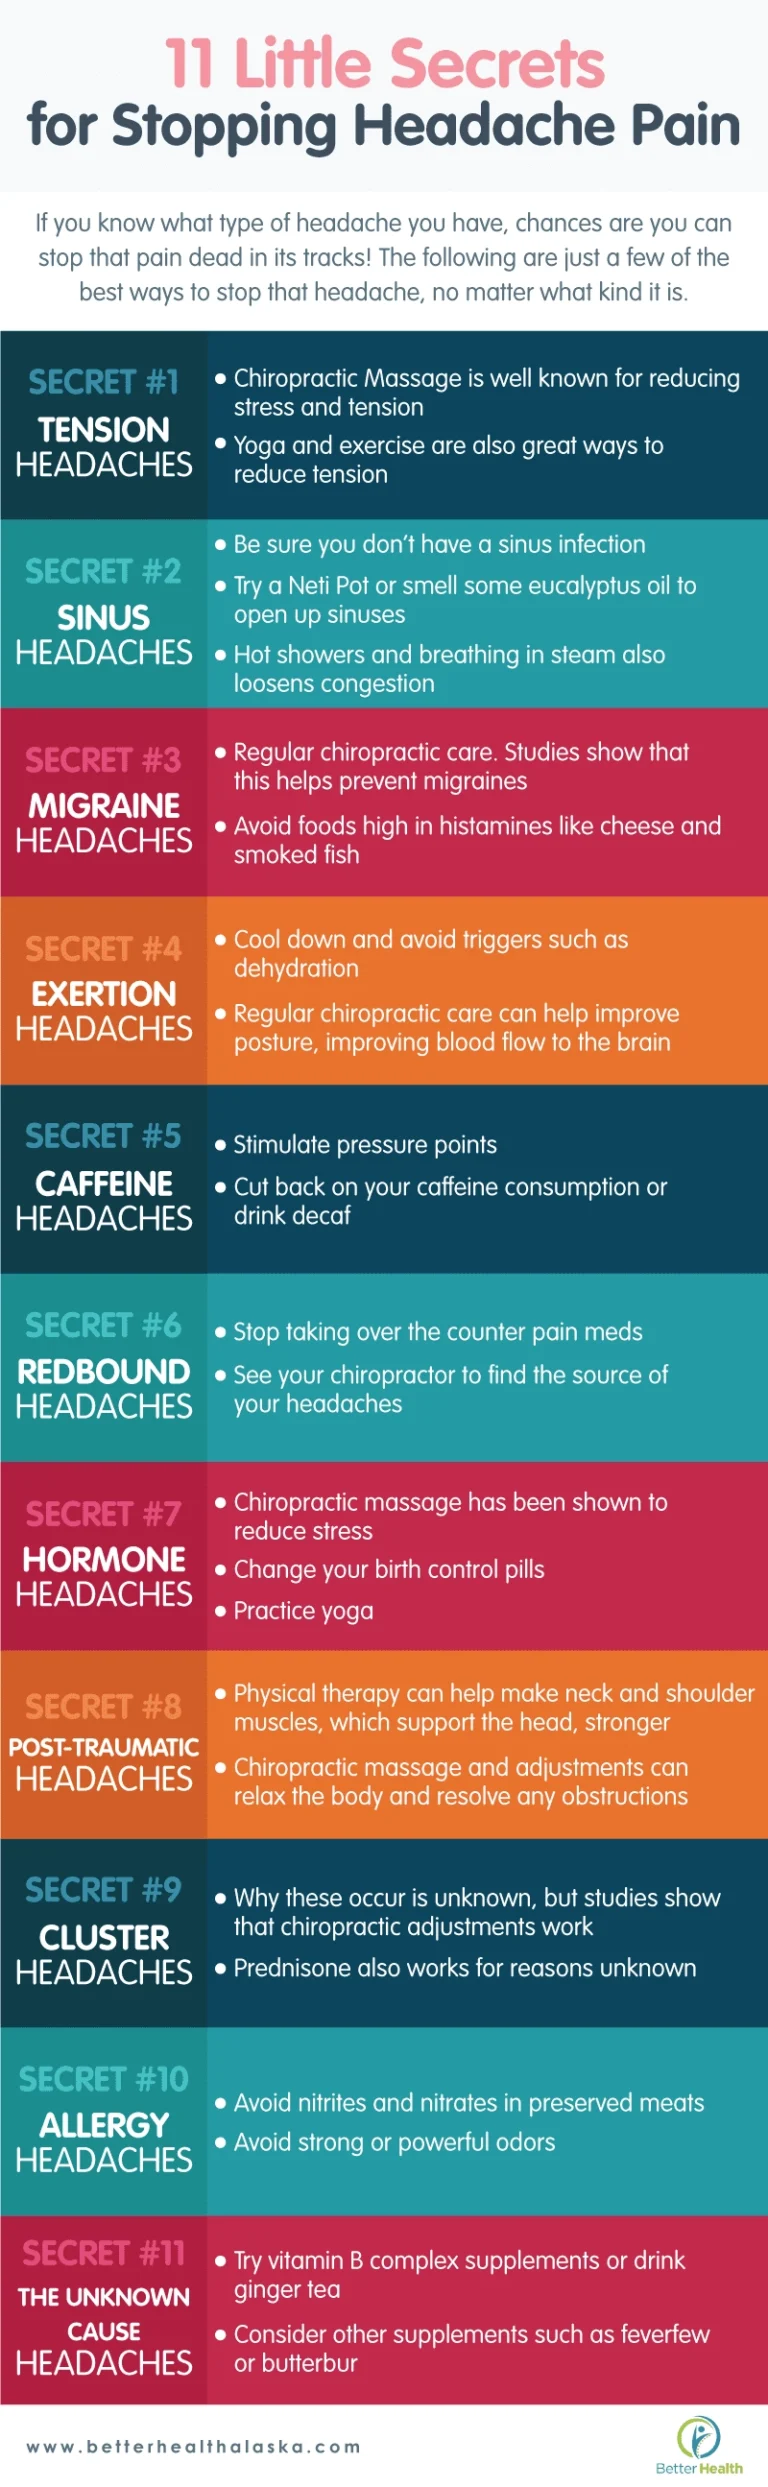 An infographic about 11 little secrets for stopping headache pain.